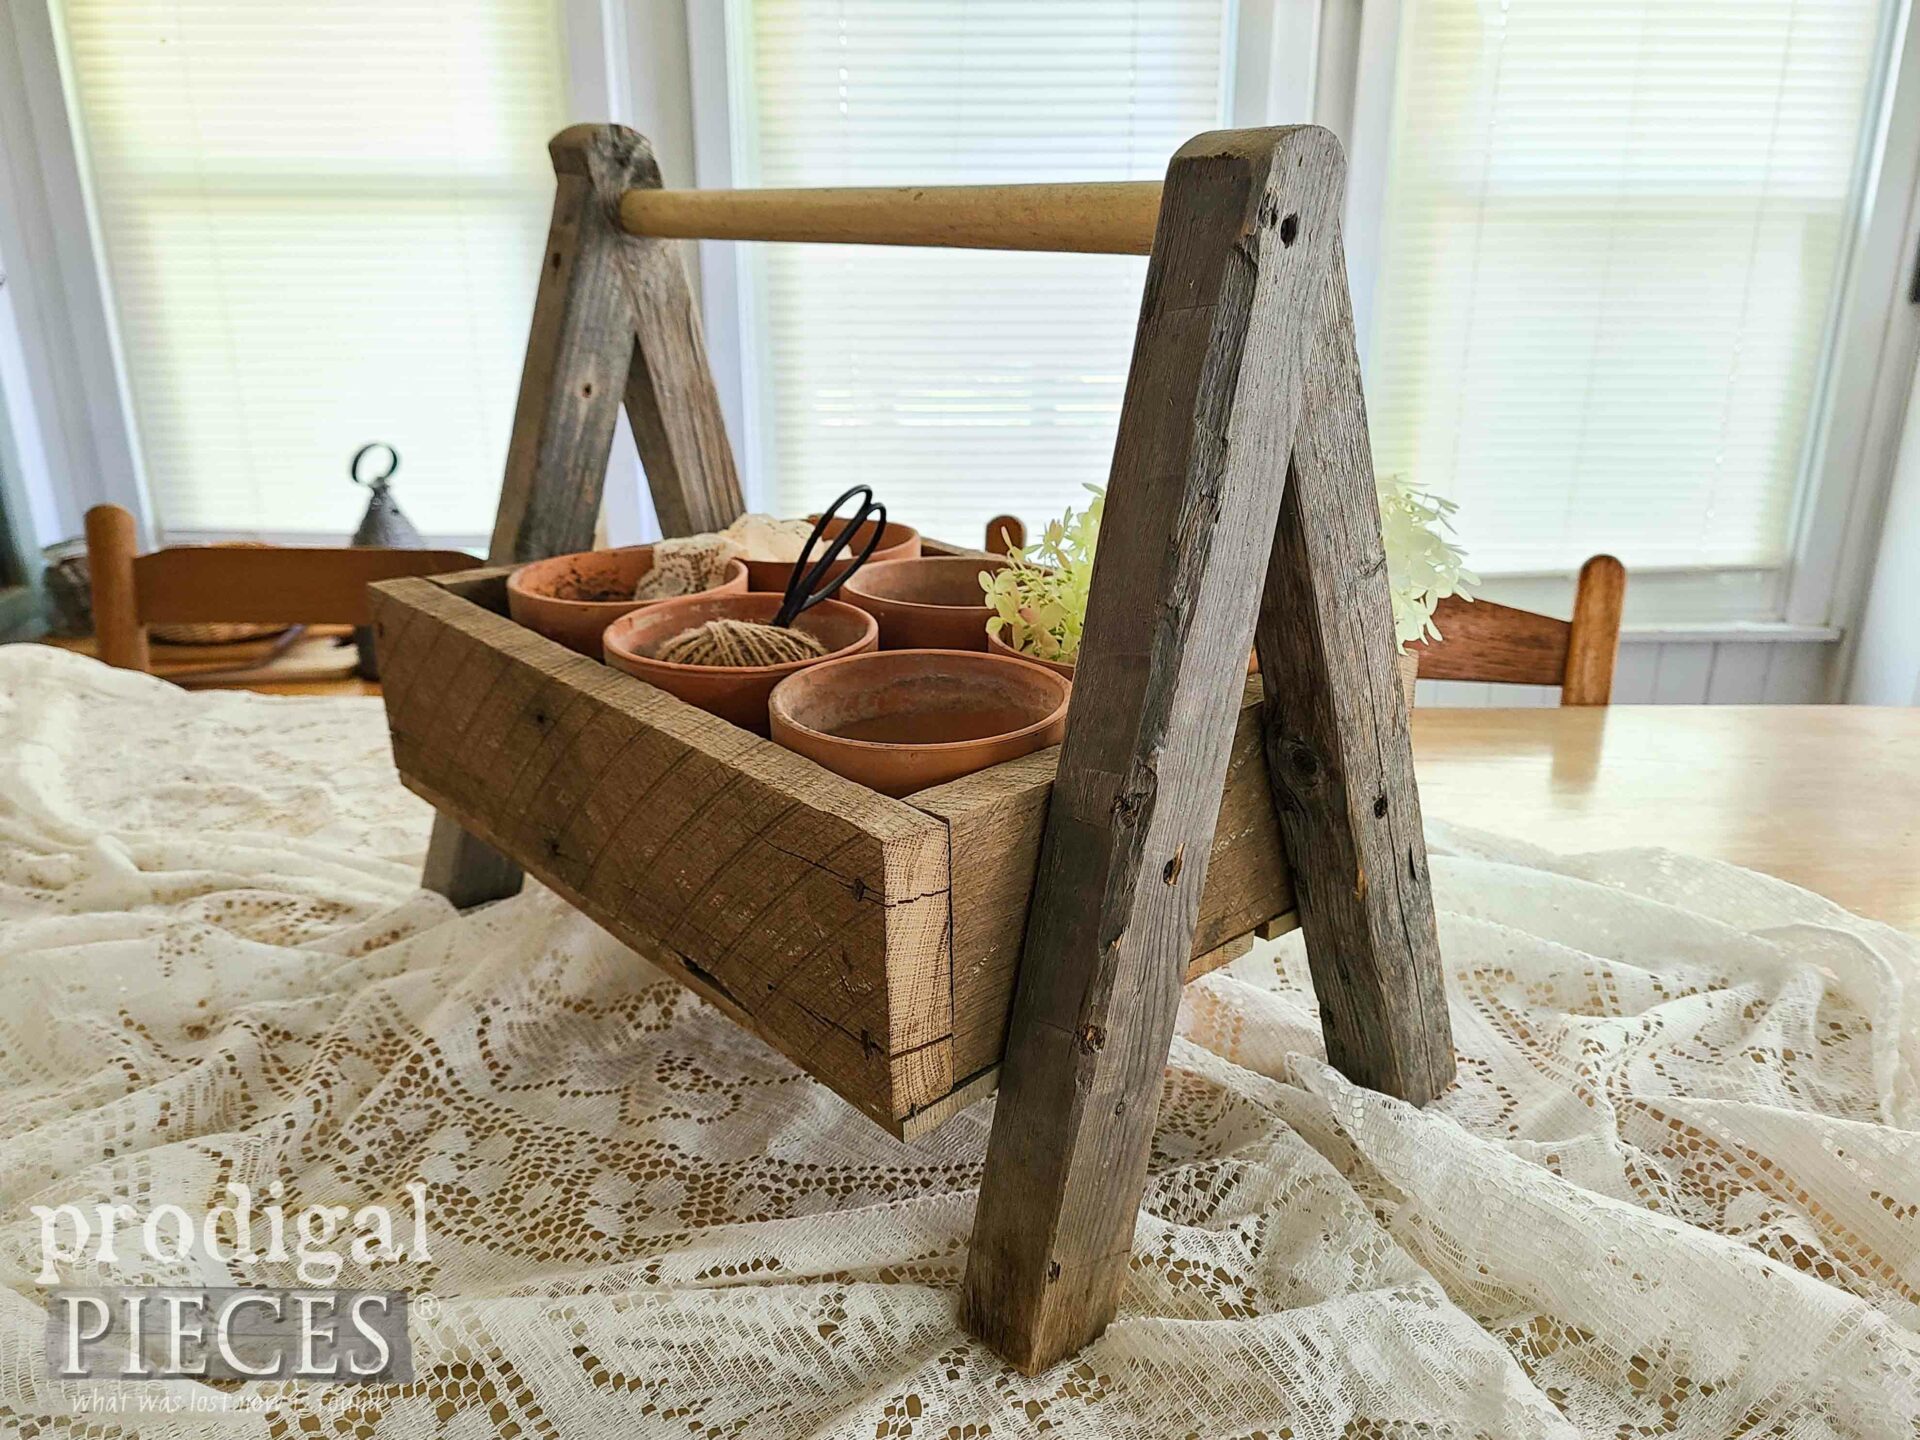 DIY Barn Wood Carry-All Tote by Larissa of Prodigal Pieces | prodigalpieces.com #prodigalpieces